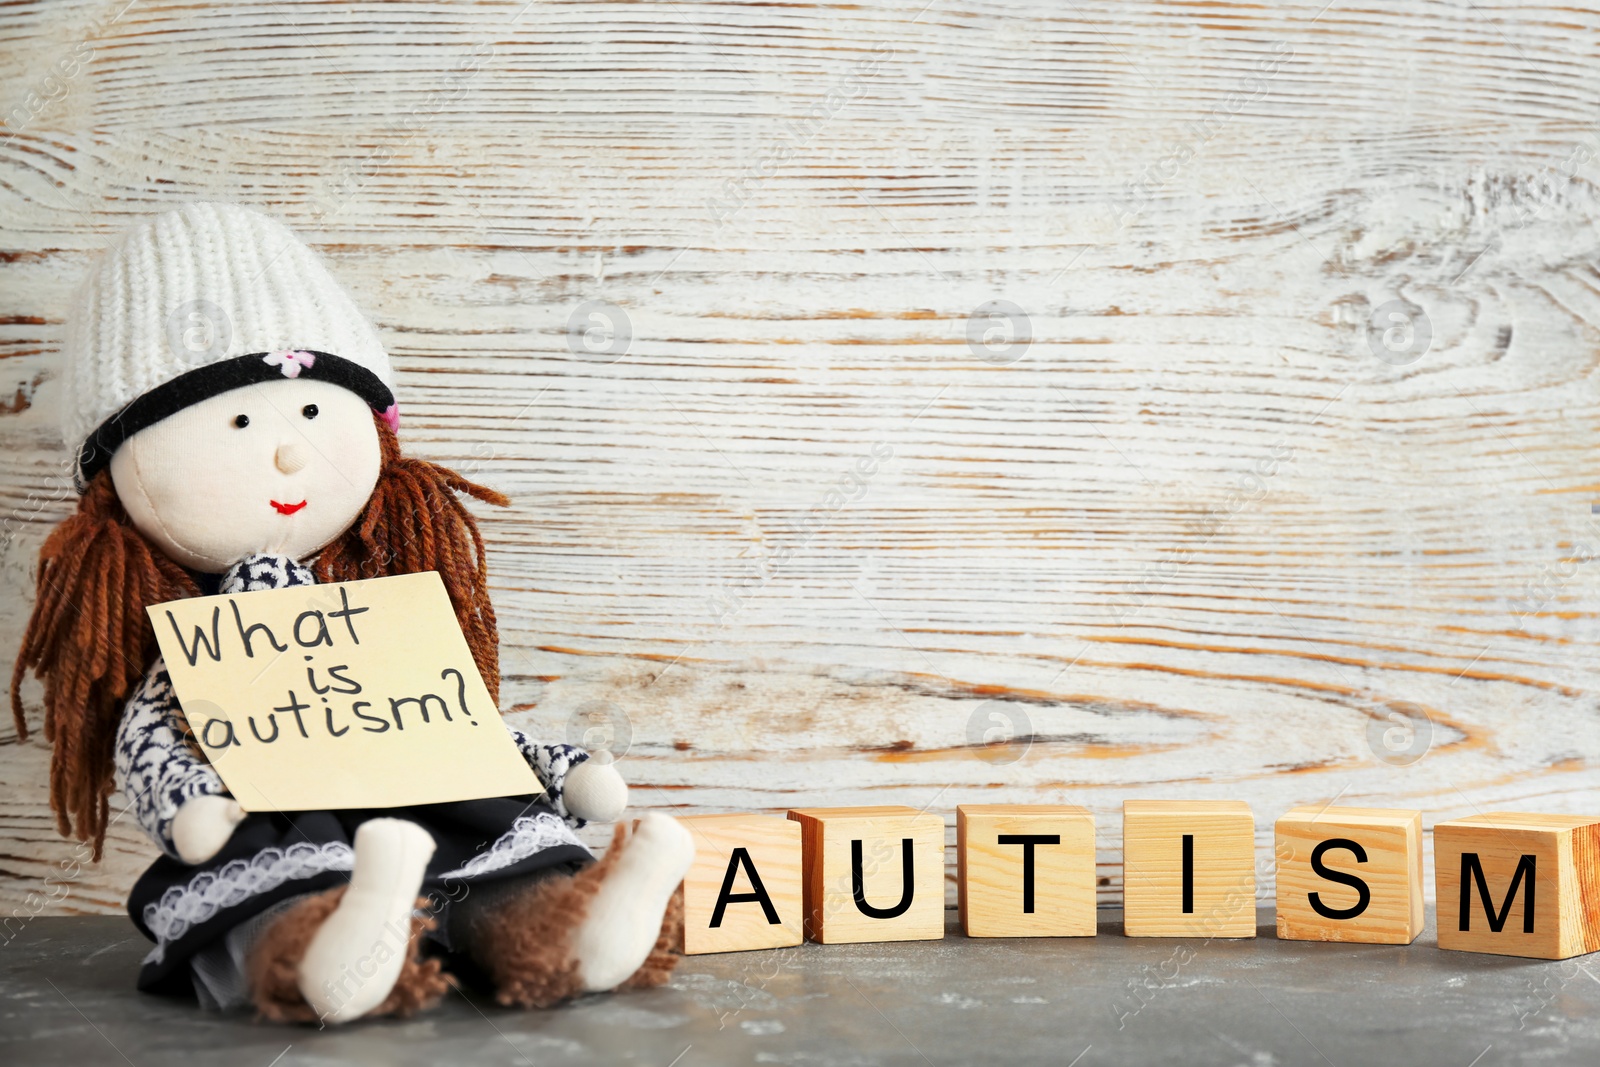 Photo of Doll holding note with phrase "What is autism?" and cubes on table